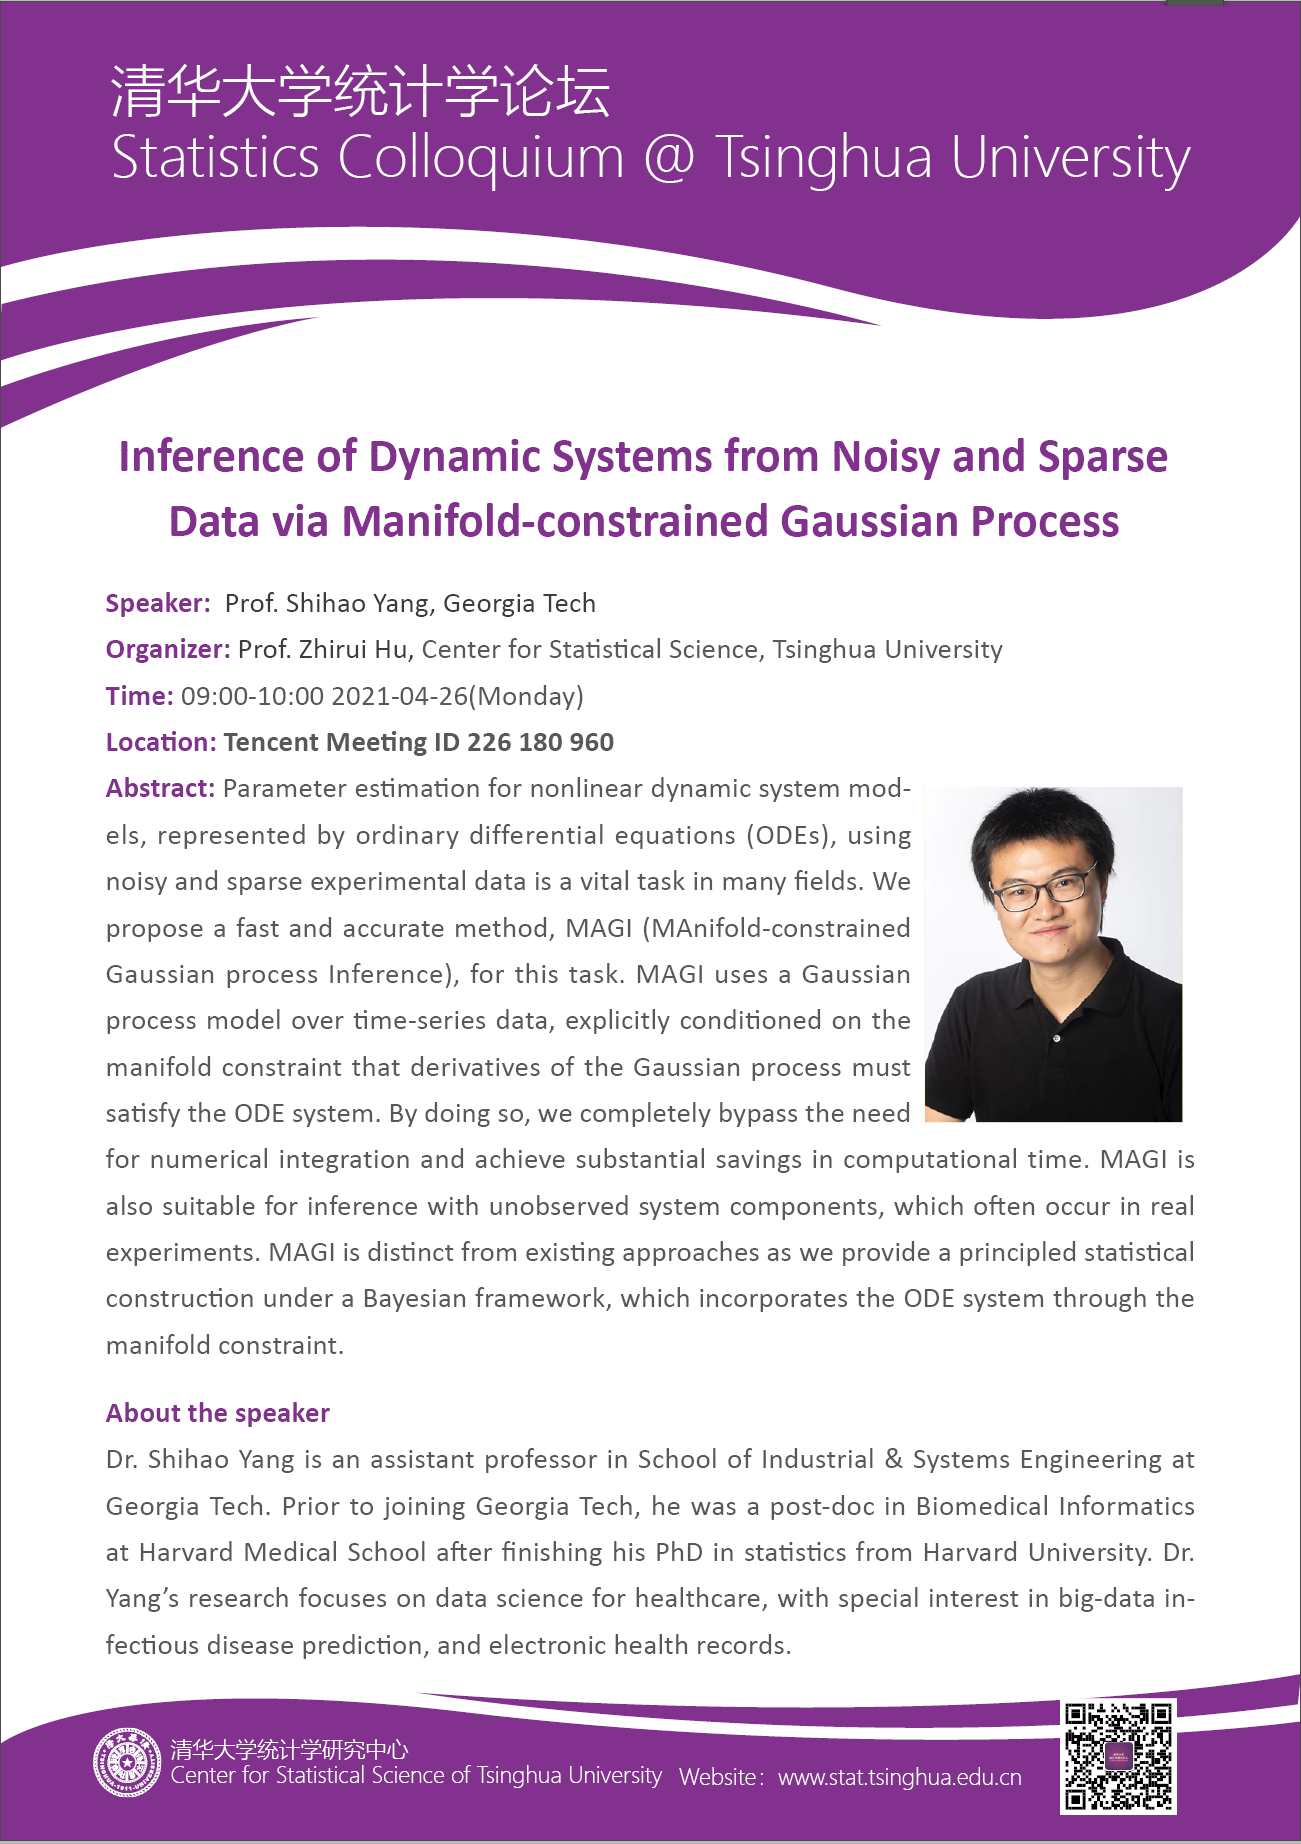 Inference of Dynamic Systems form Noisy and Sparse Data via Manifold-constrained Gaussian Process